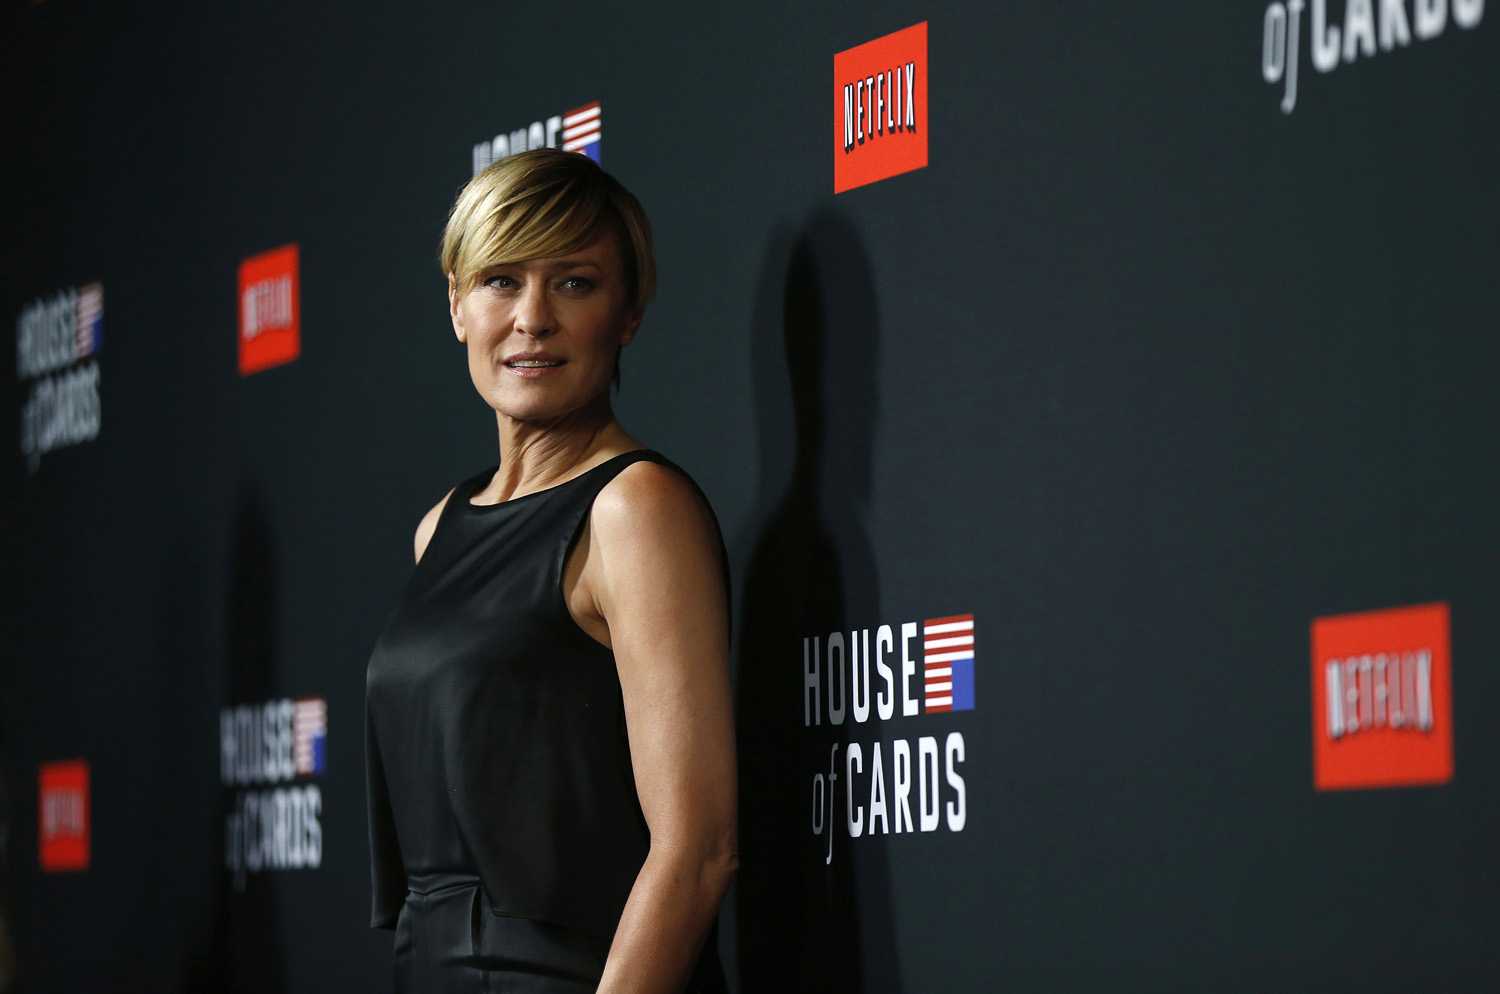 Cast member Robin Wright poses at the premiere for the second season of the television series "House of Cards" at the Directors Guild of America in Los Angeles, California February 13, 2014. (Mario Anzuoni&amp;mdash;Reuters)